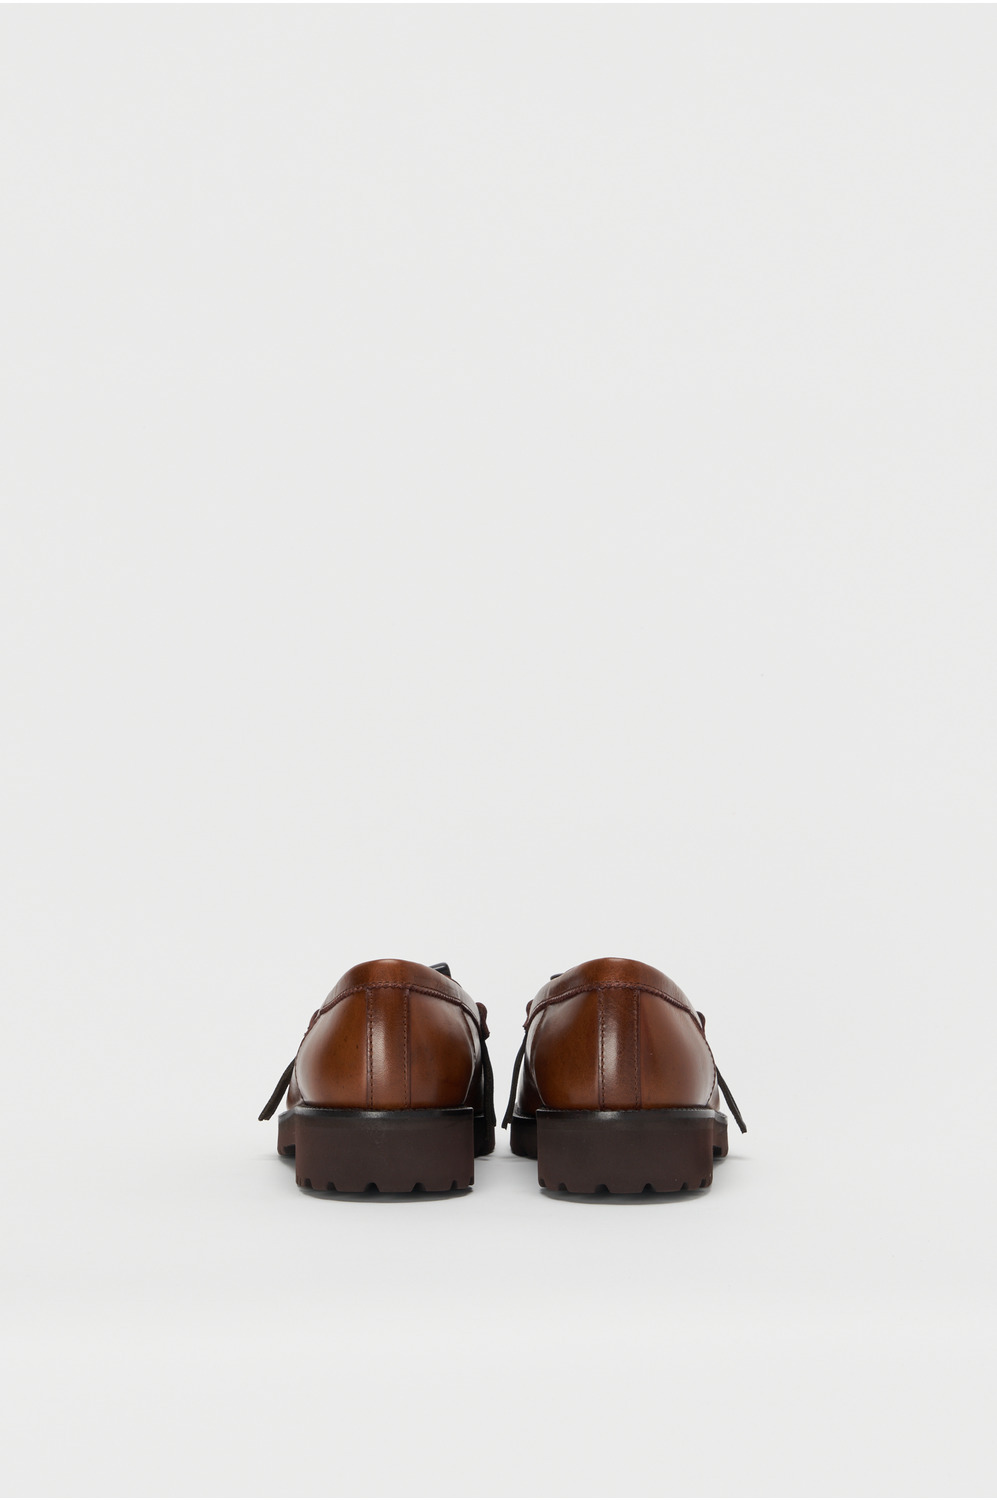 horn loafer smooth 詳細画像 brown 4